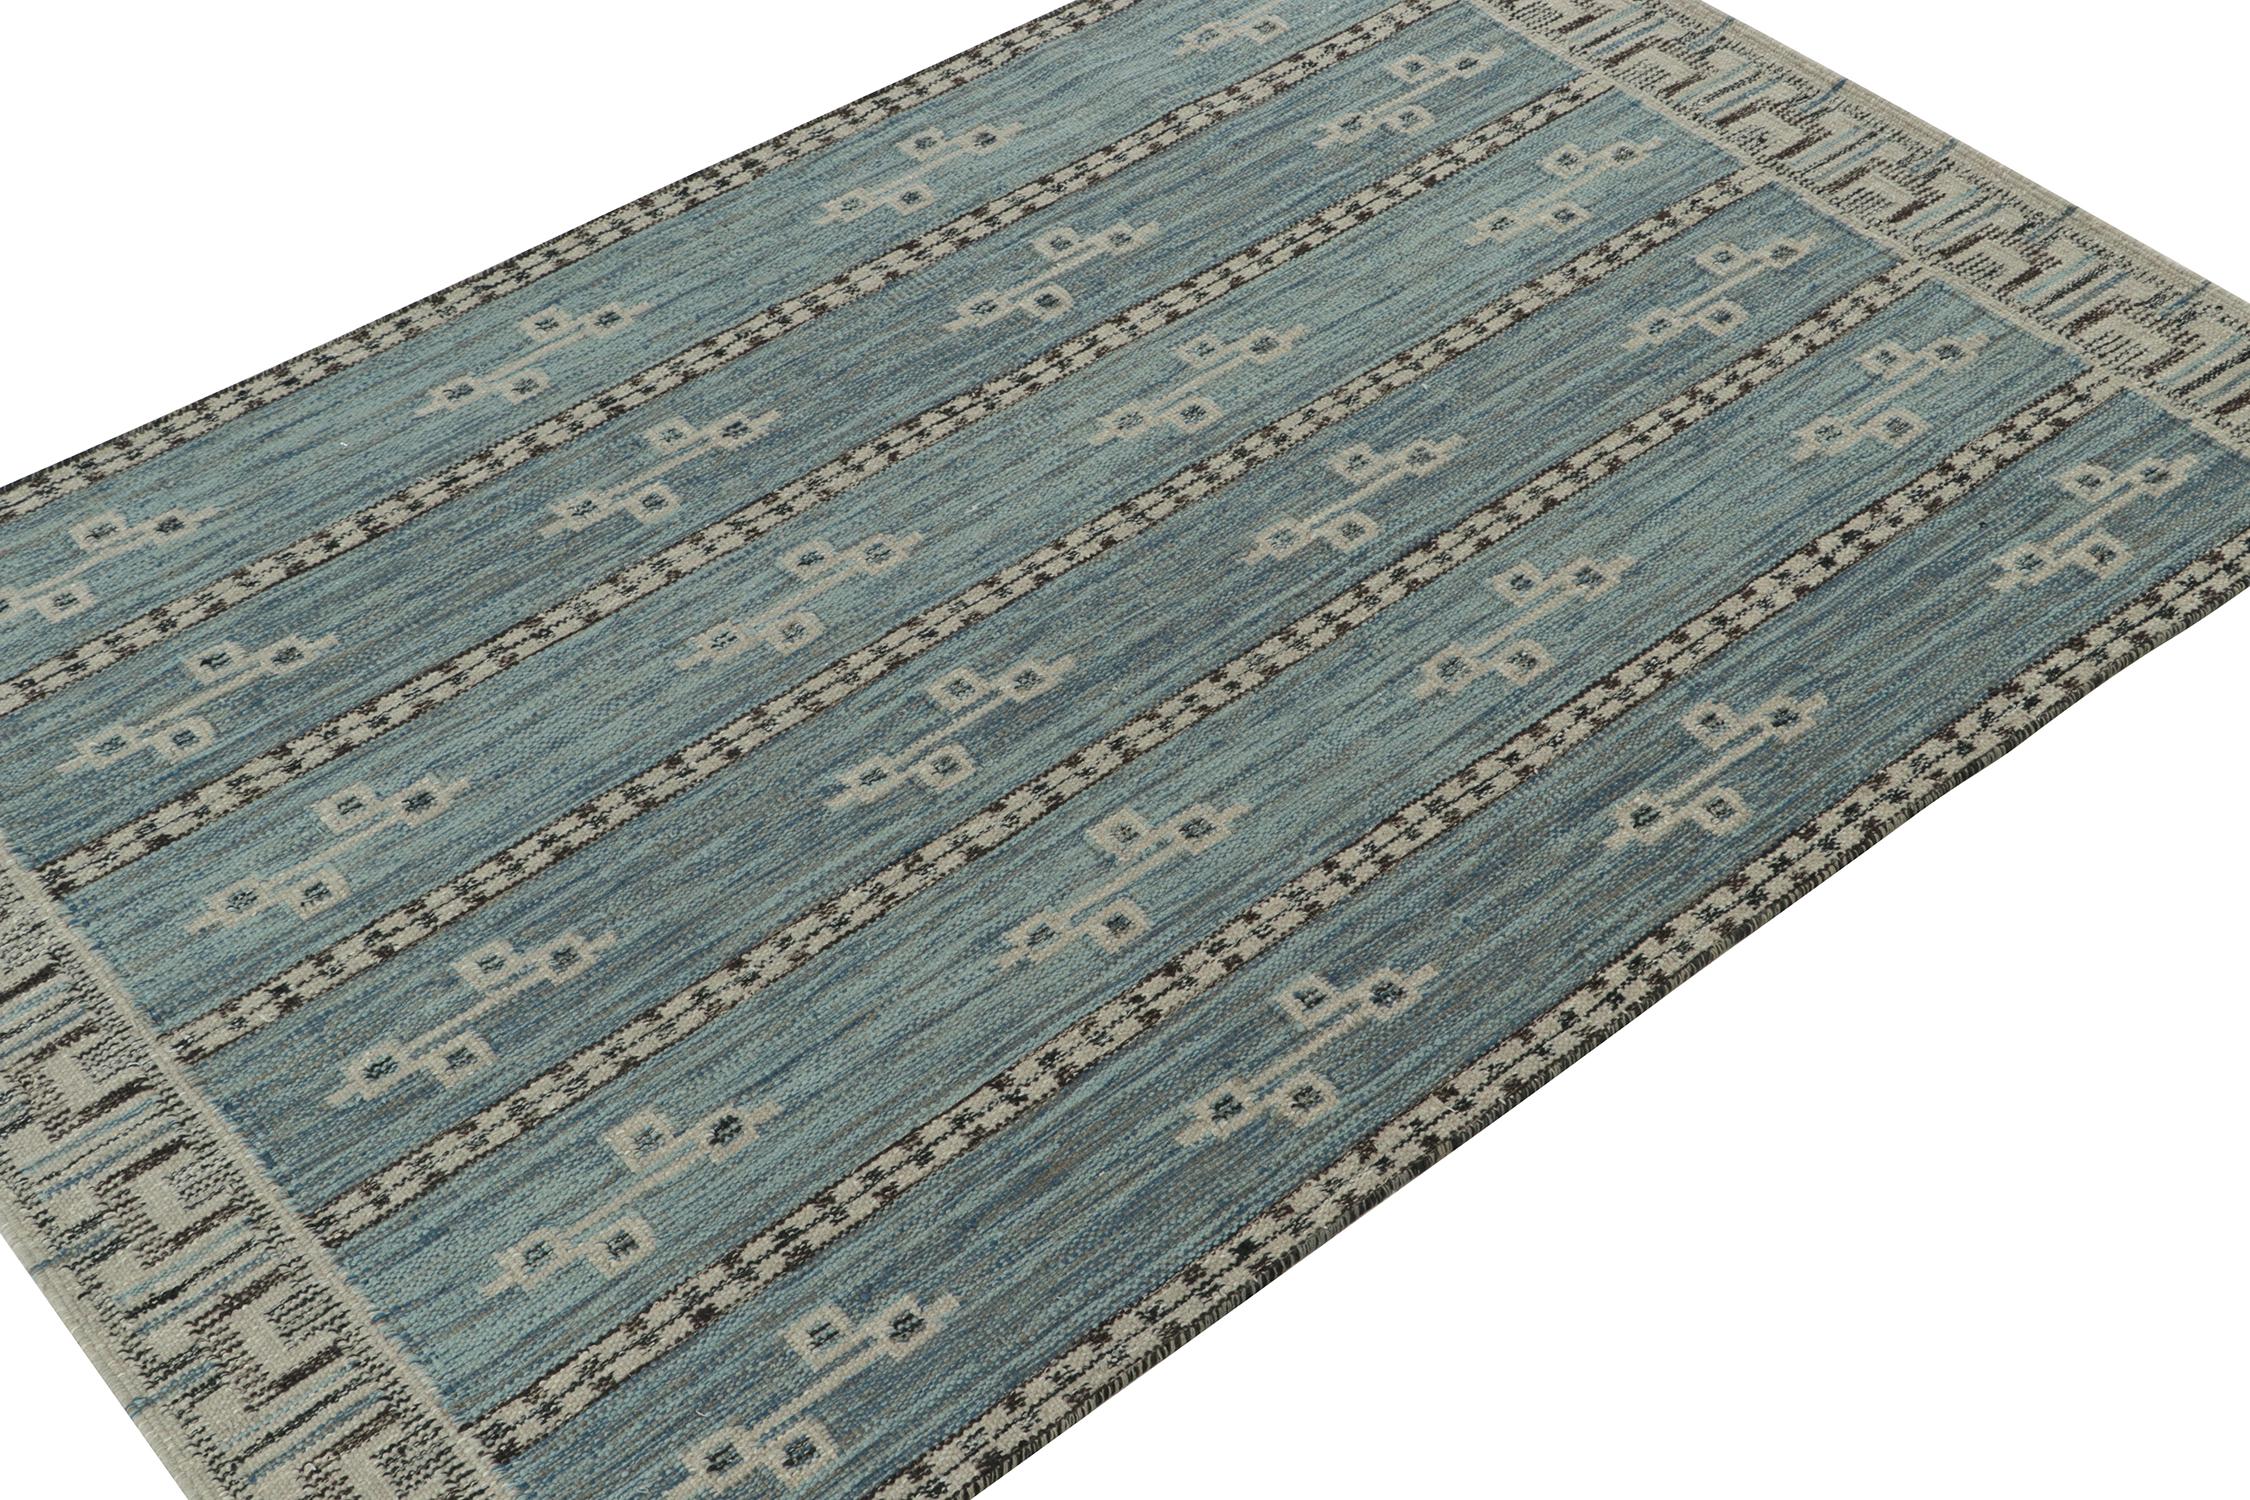 A smart 6x9 Swedish style kilim Rug & Kilim’s award-winning Scandinavian flat weave collection. Handwoven in wool. 
On the Design: 
This rug design is one of our most well-received in the collection, with geometric patterns and stripes in blue,